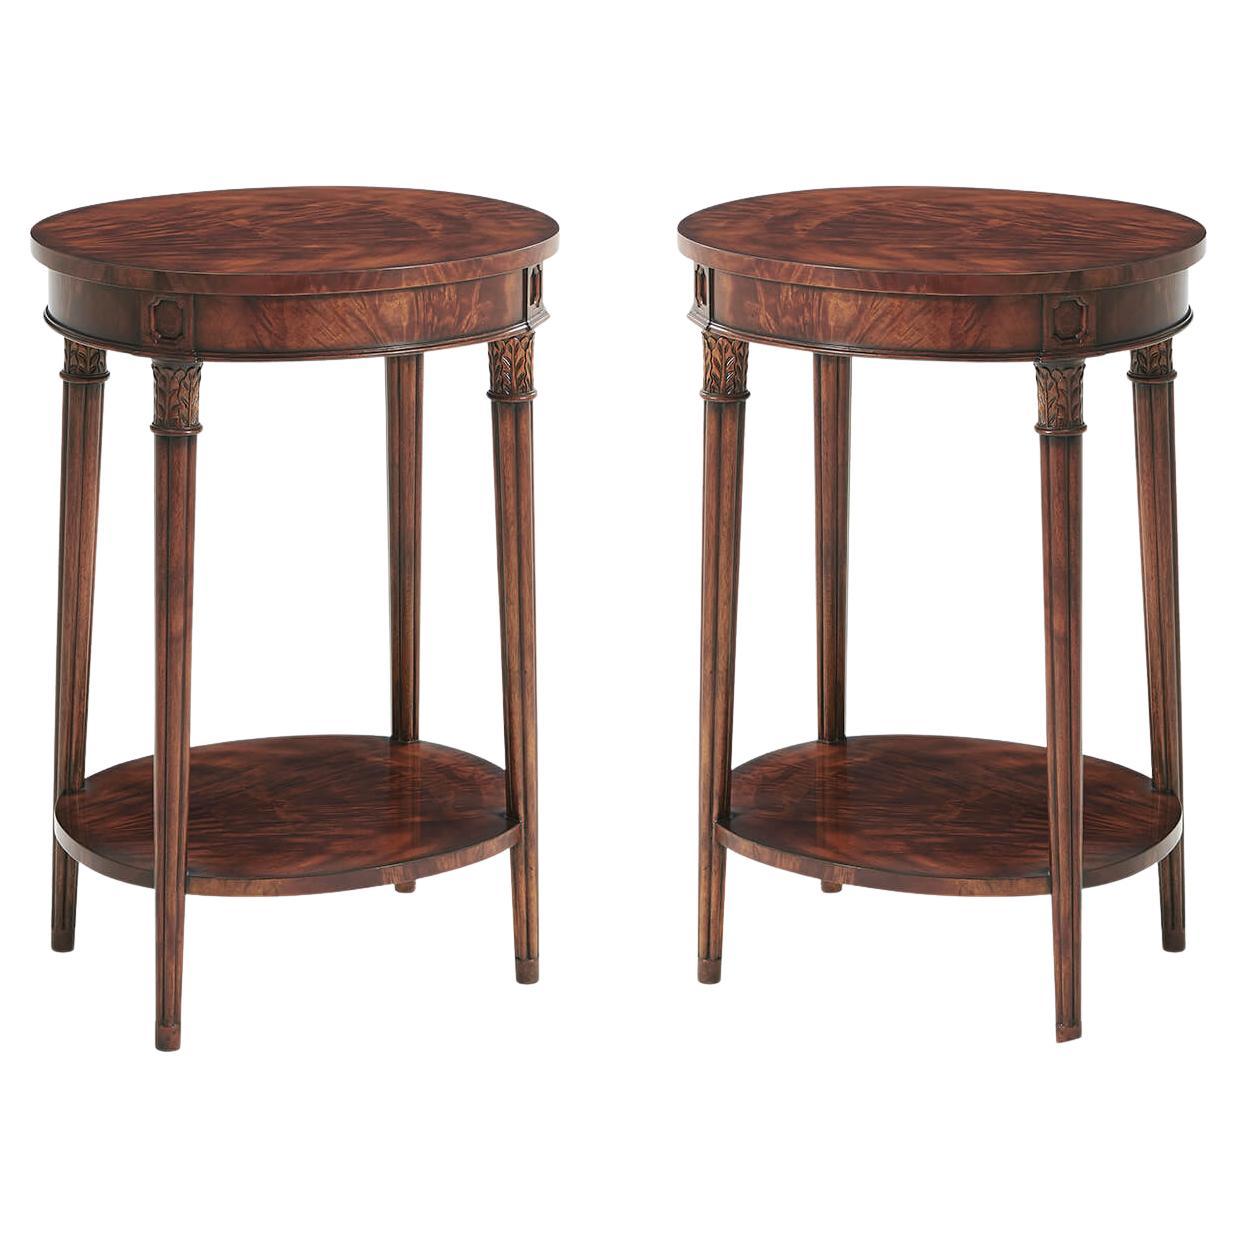 Pair of Regency Oval Mahogany Side Tables For Sale